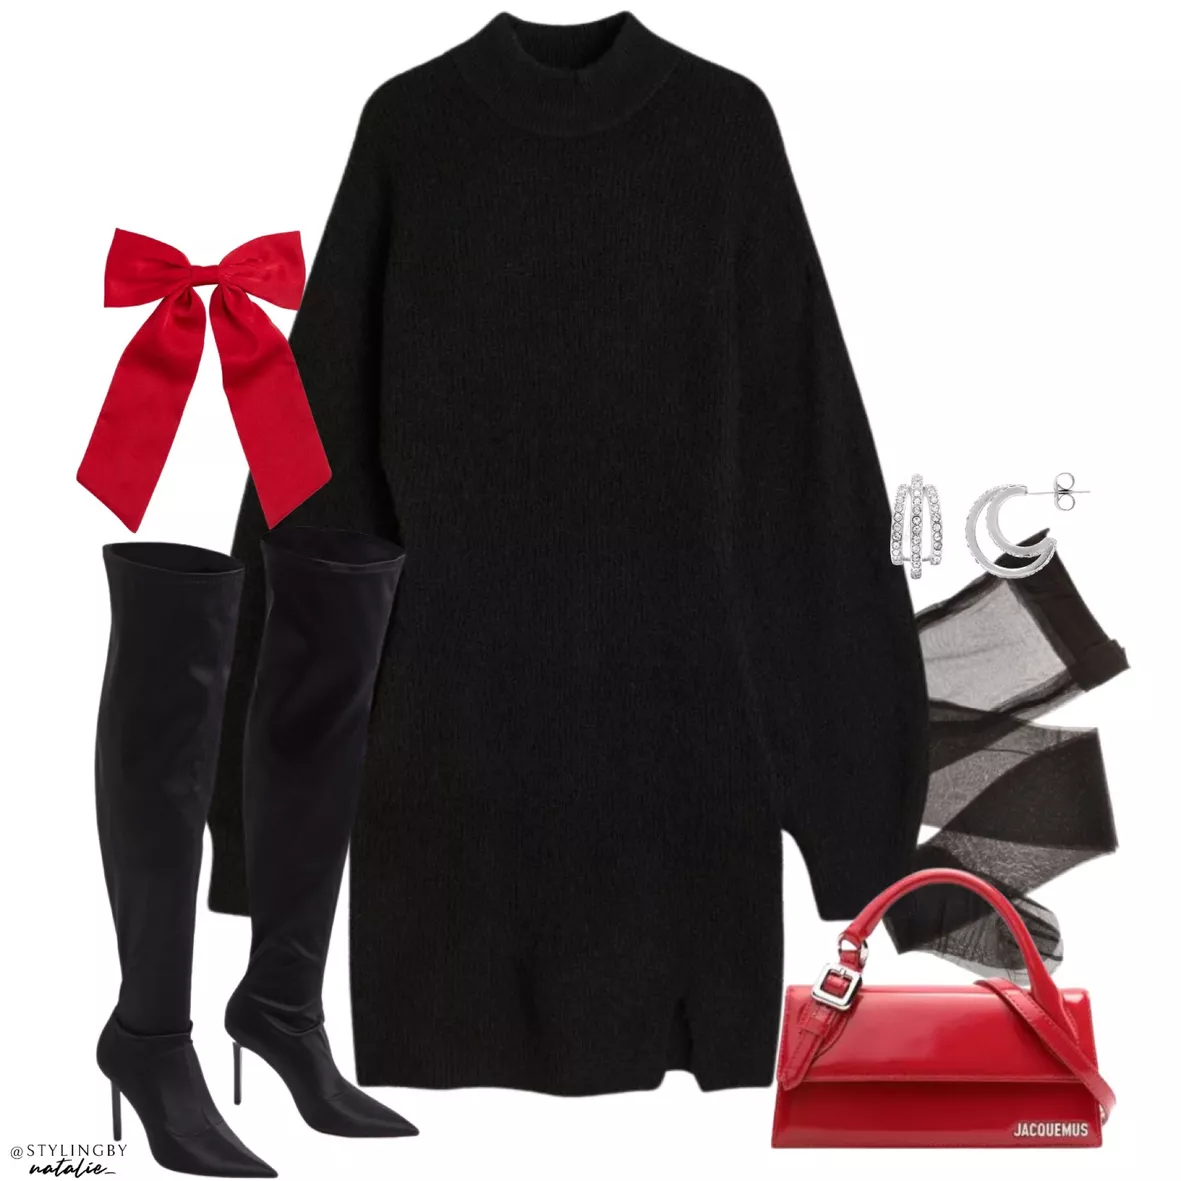 Red Knit Turtleneck with Black Tights Outfits (2 ideas & outfits)